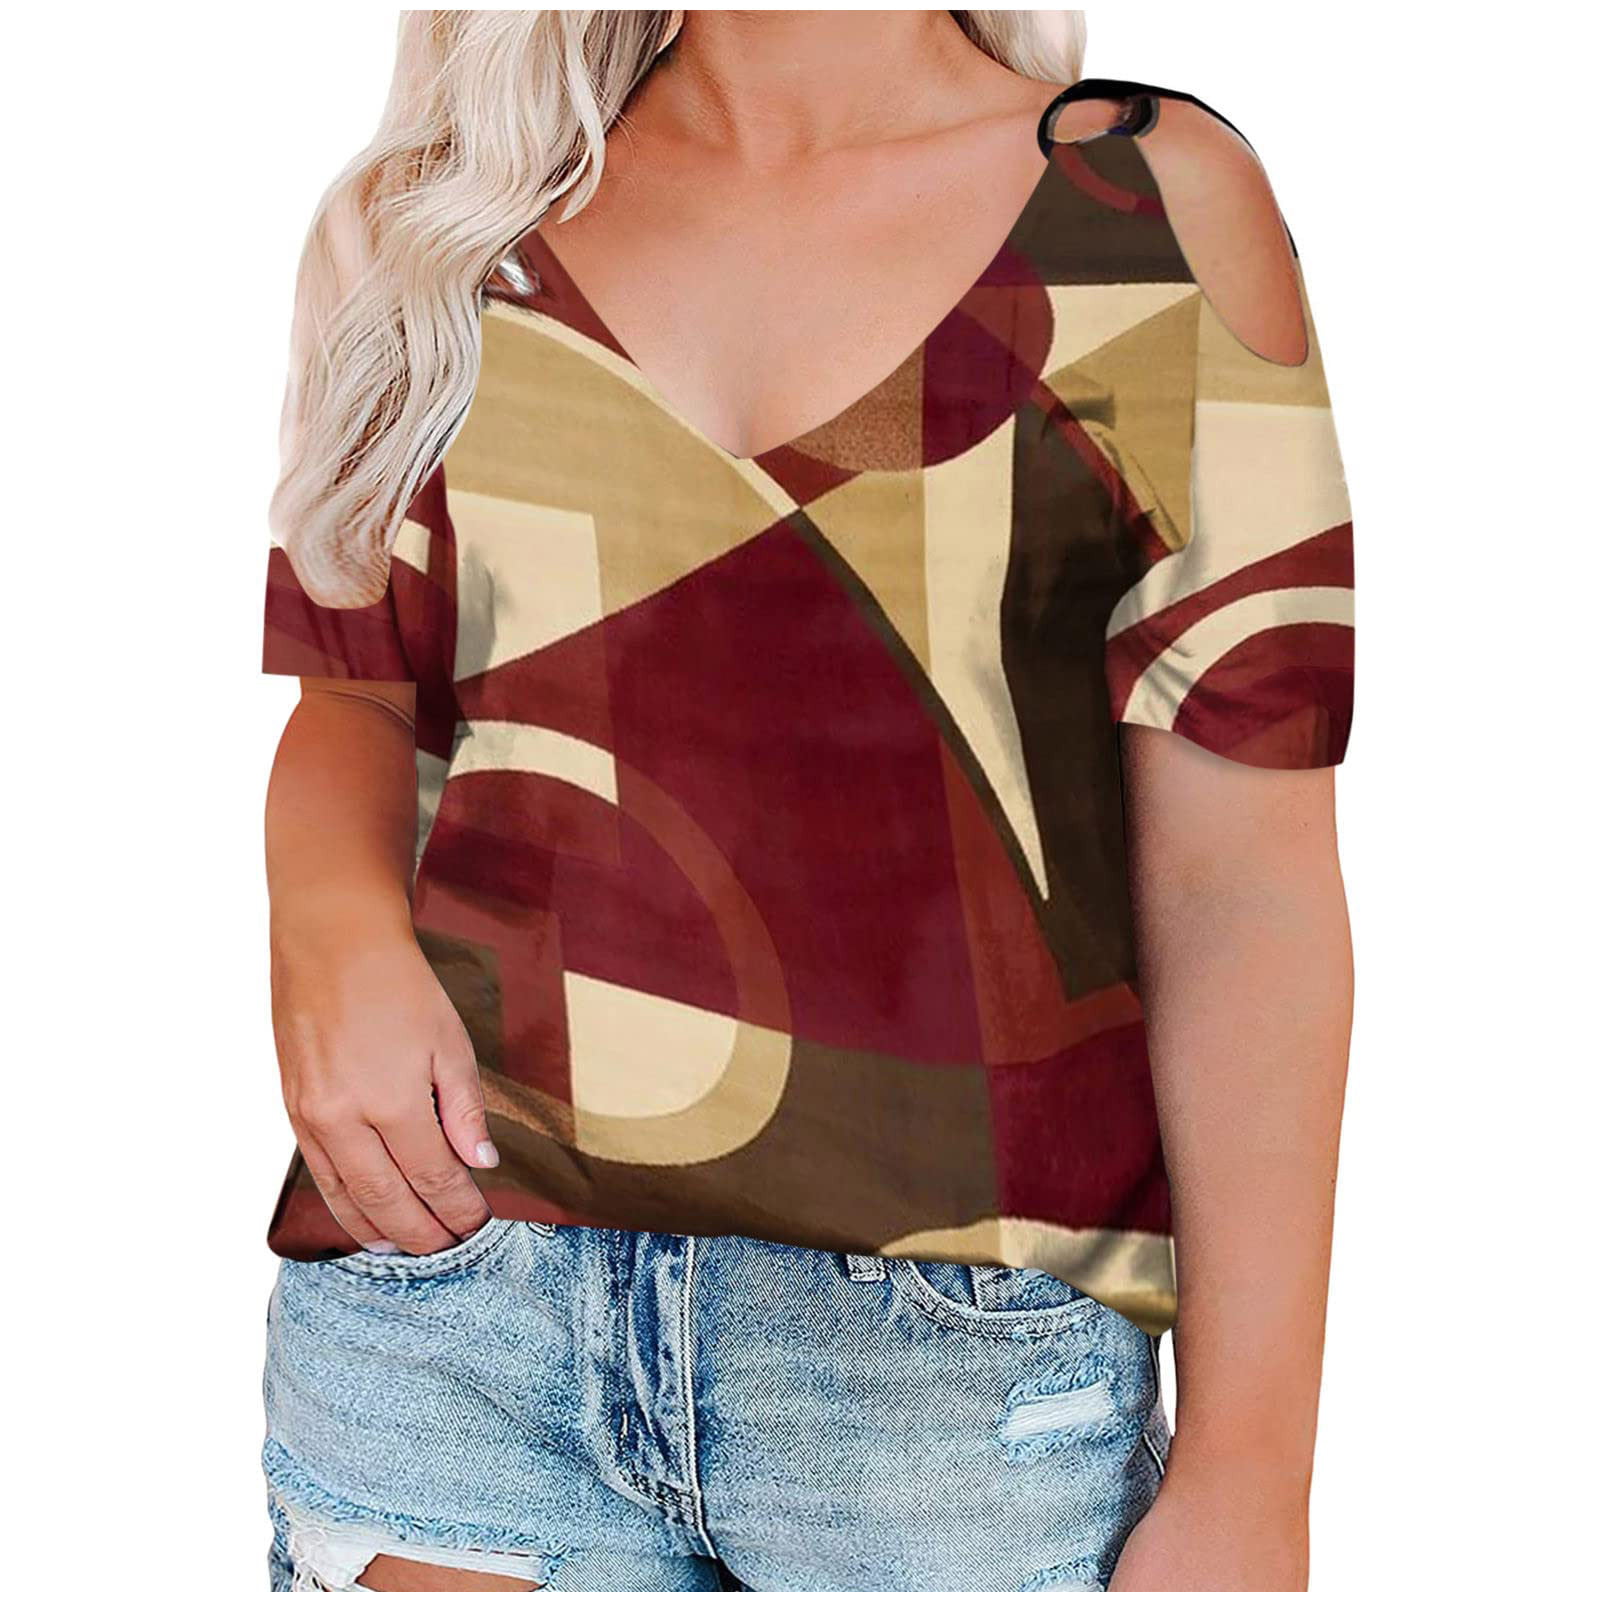 ✅Plus Size Womens Cold Shoulder T Shirt Ladies Summer Casual Tunic Blouse Tops 